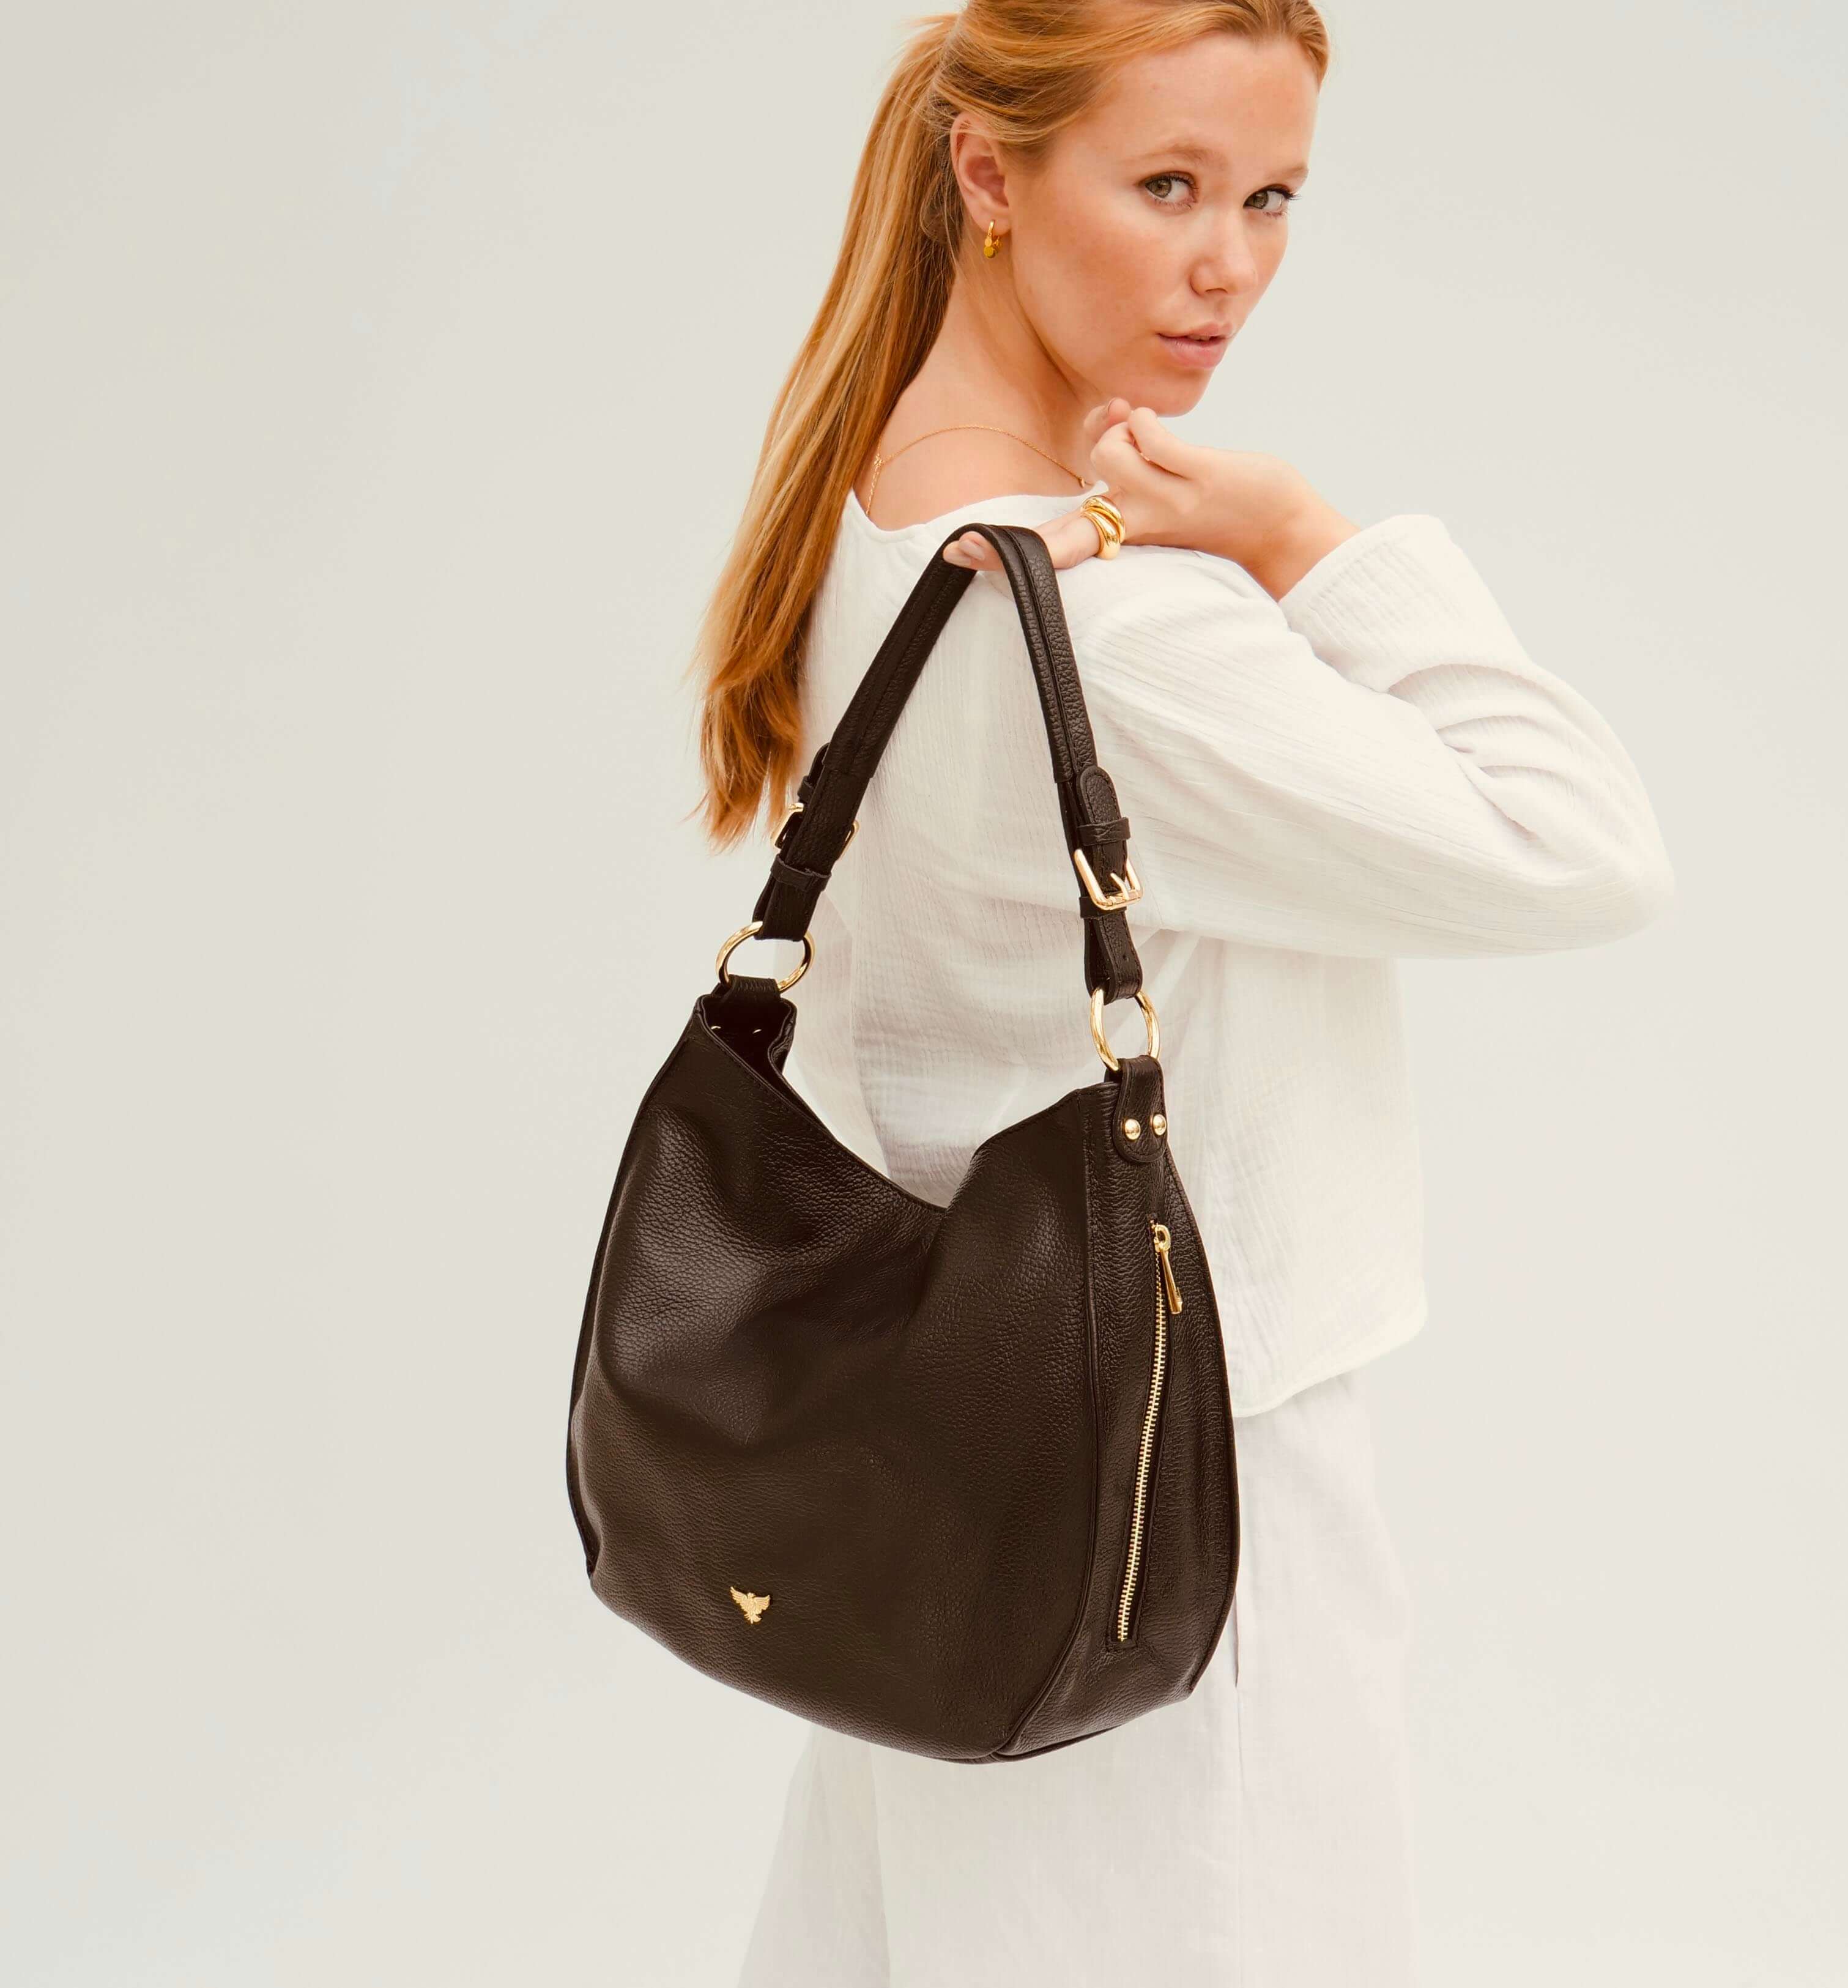 The Harriet Black Leather Bag With Black & Stone Arrow Strap